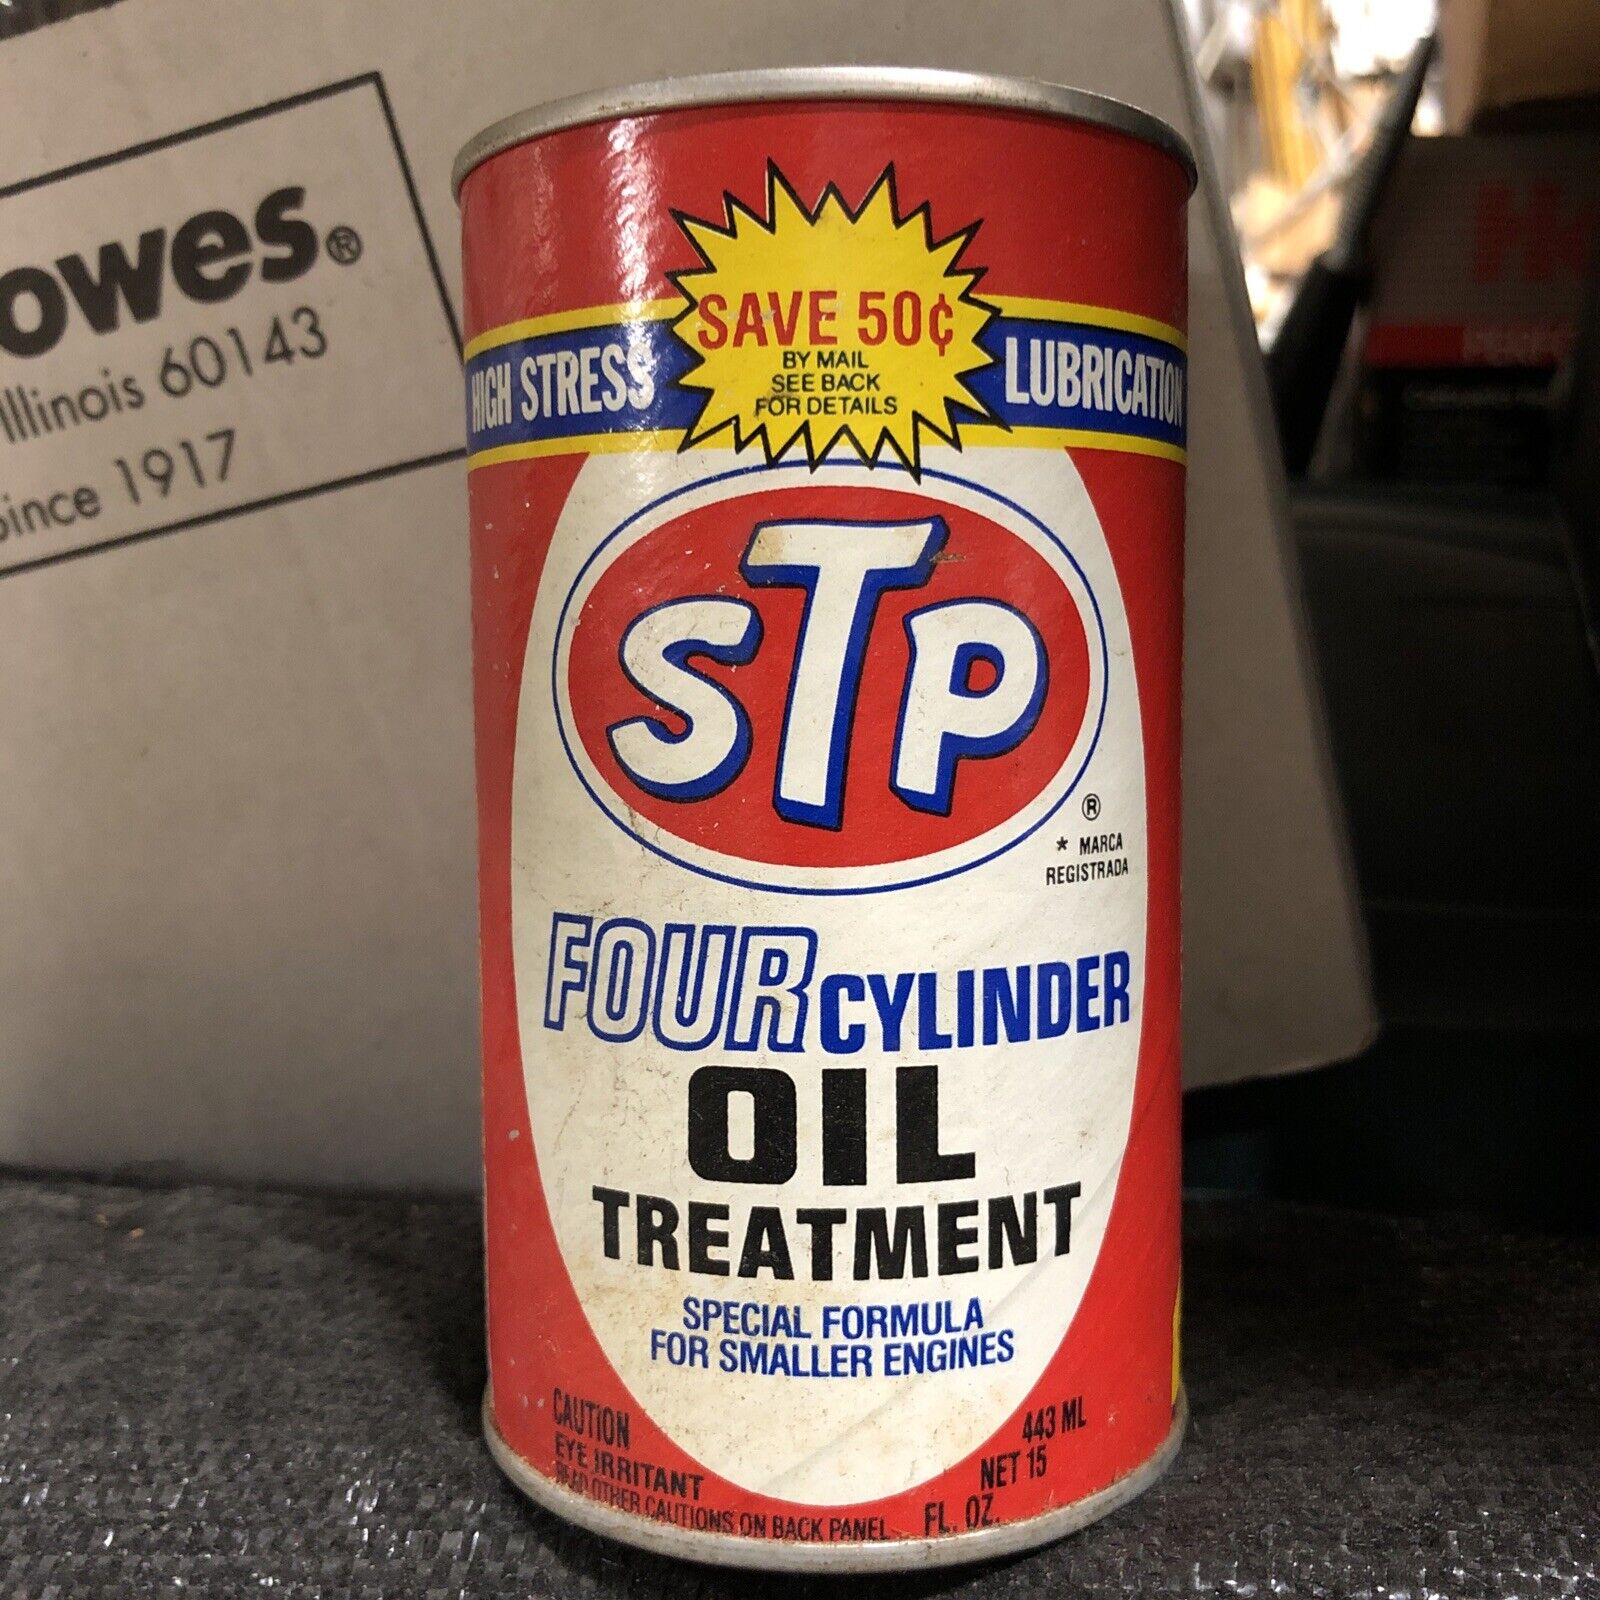 1 Can STP Four Cylinder Oil Treatment 15 oz Unopened Can NOS Vintage Collectible